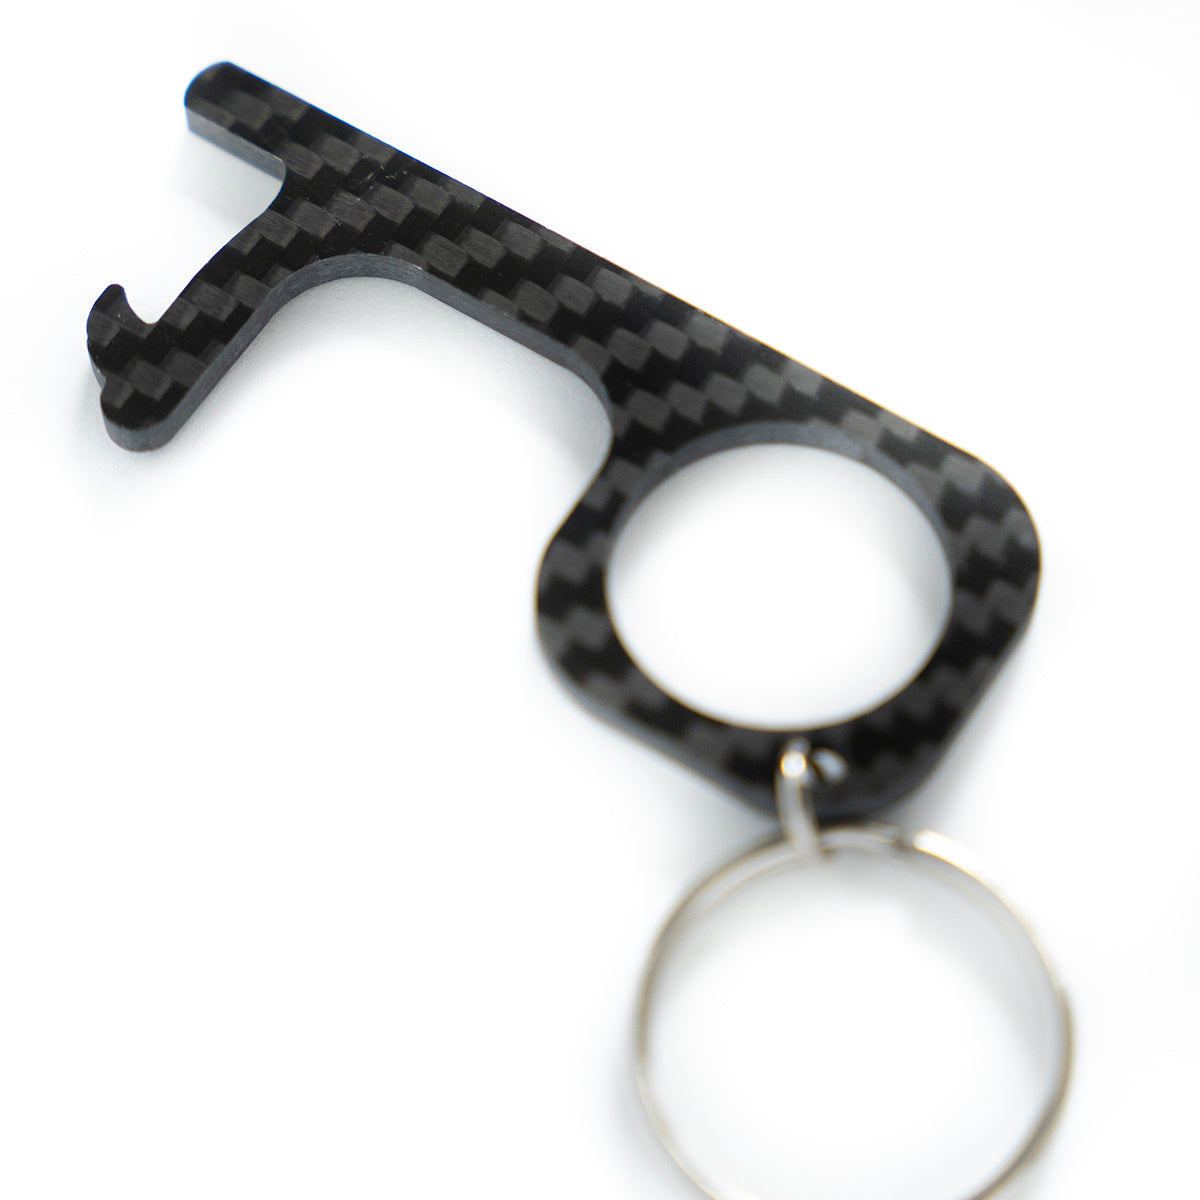 Real carbon fiber no-touch keychain and bottle opener